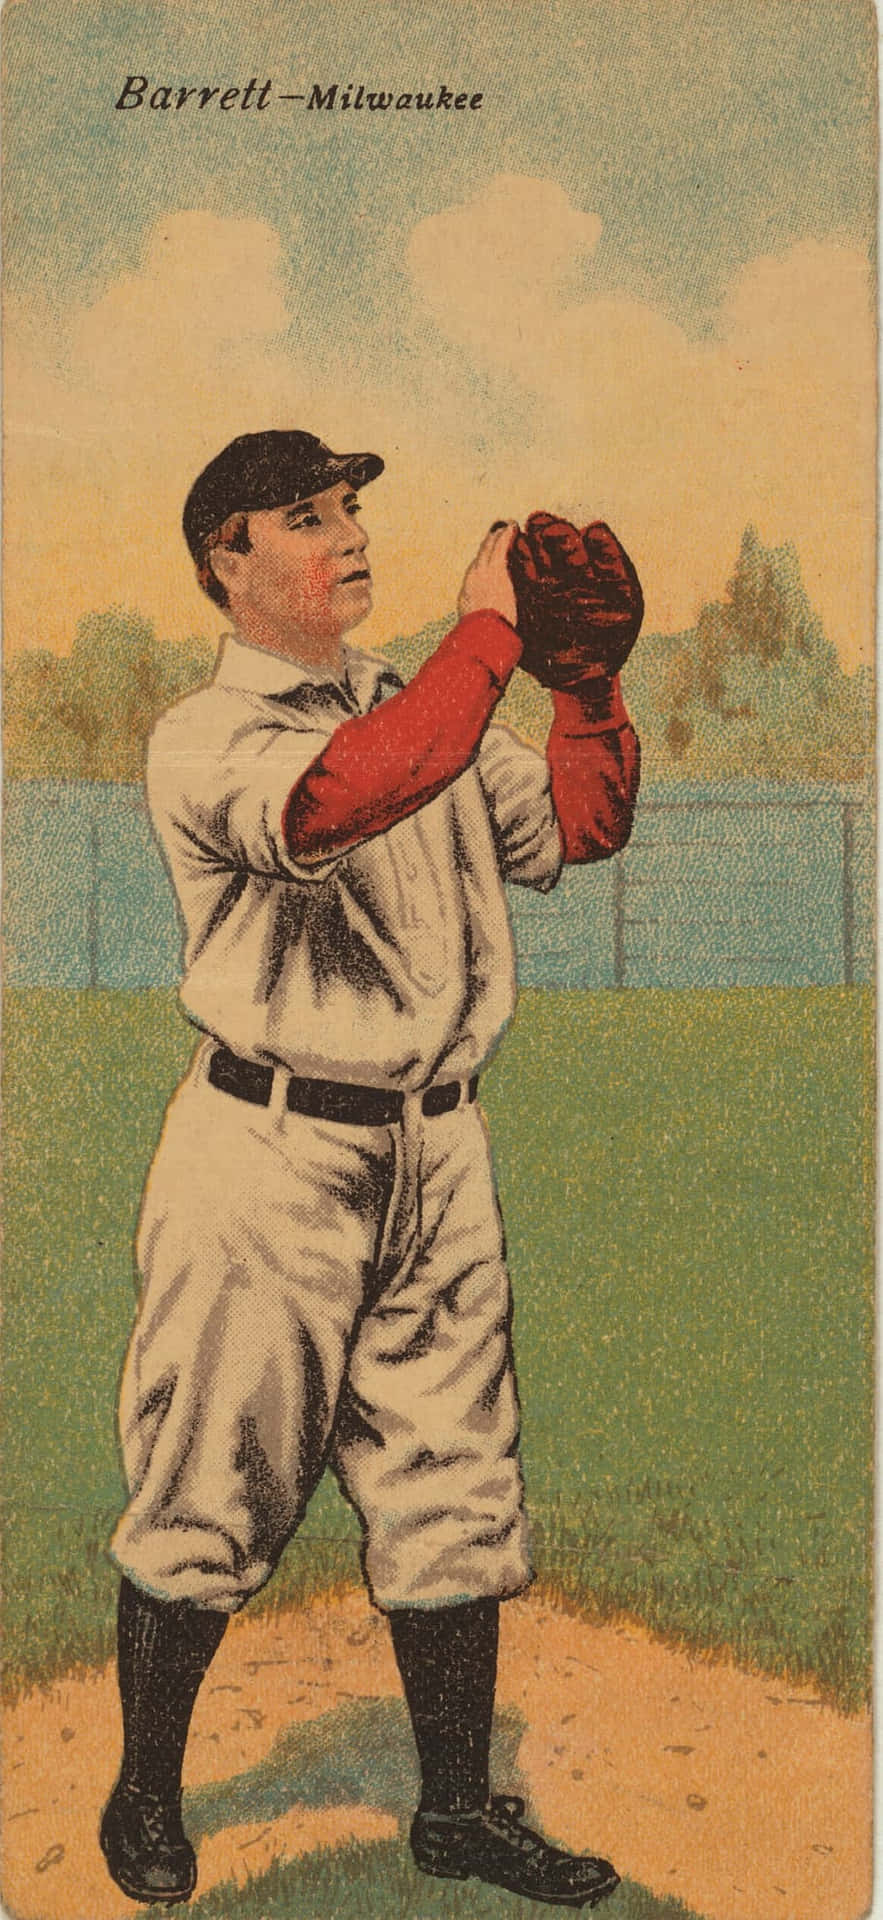 A Collection of Vintage Baseball Cards Wallpaper